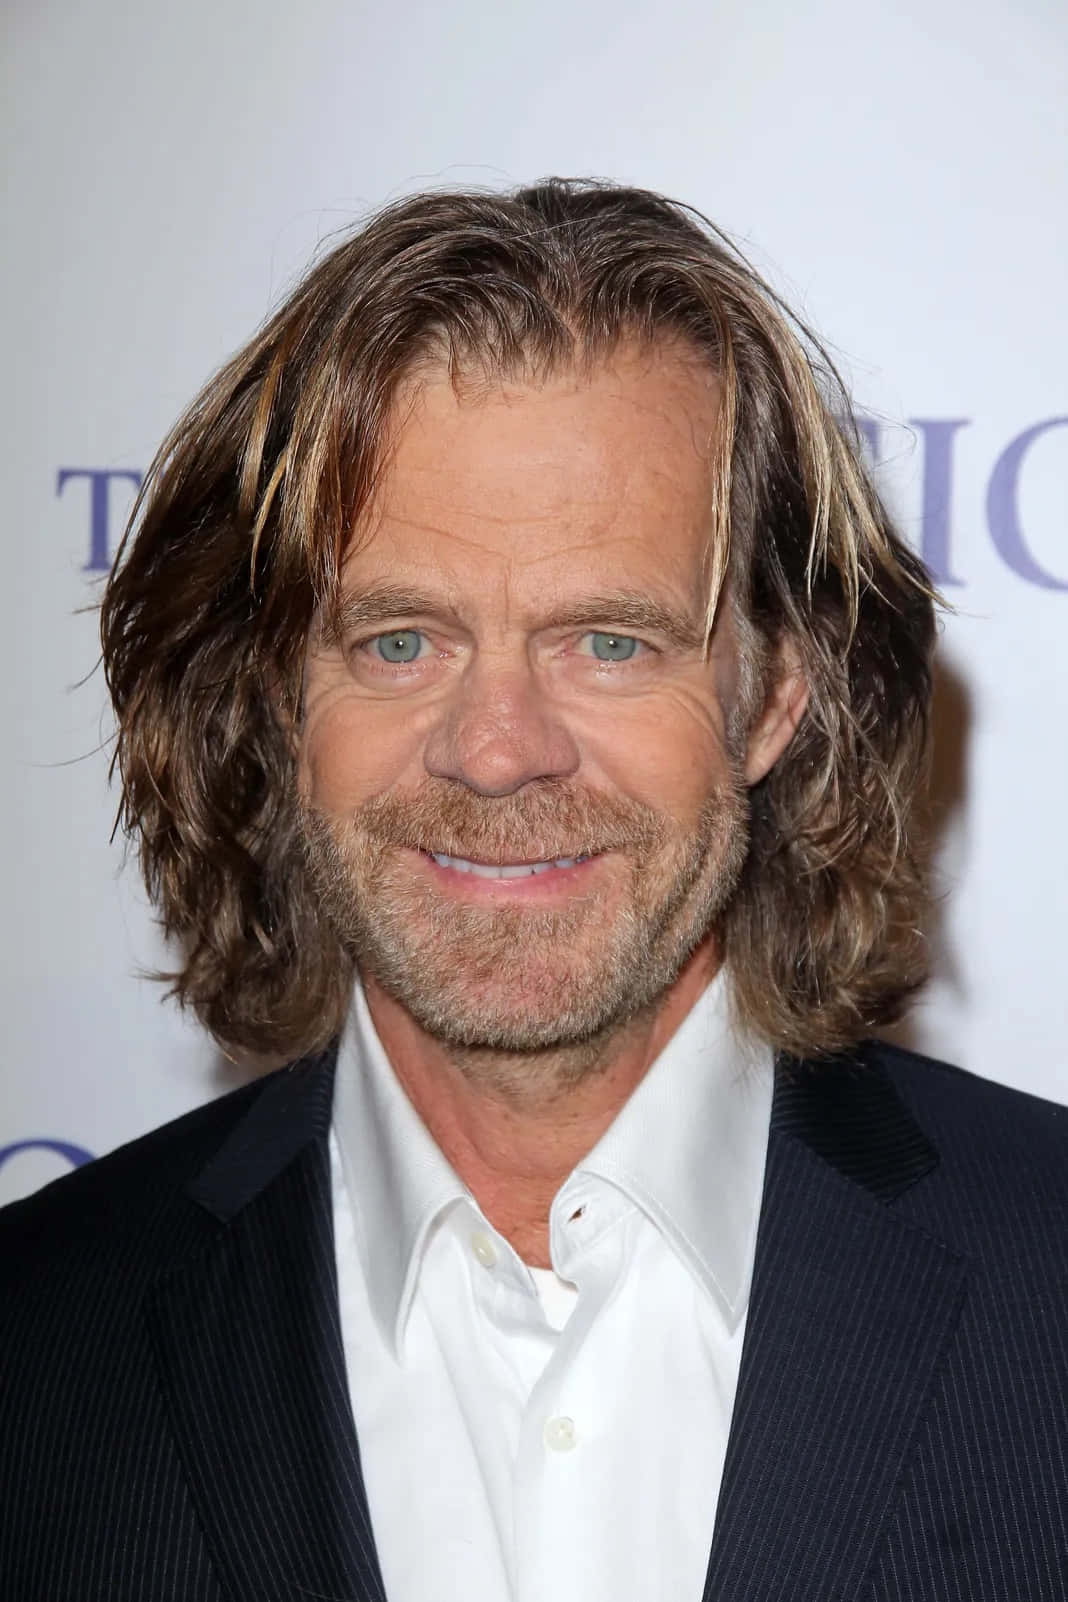 William H. Macy - Talented Actor In A Pensive Pose Background